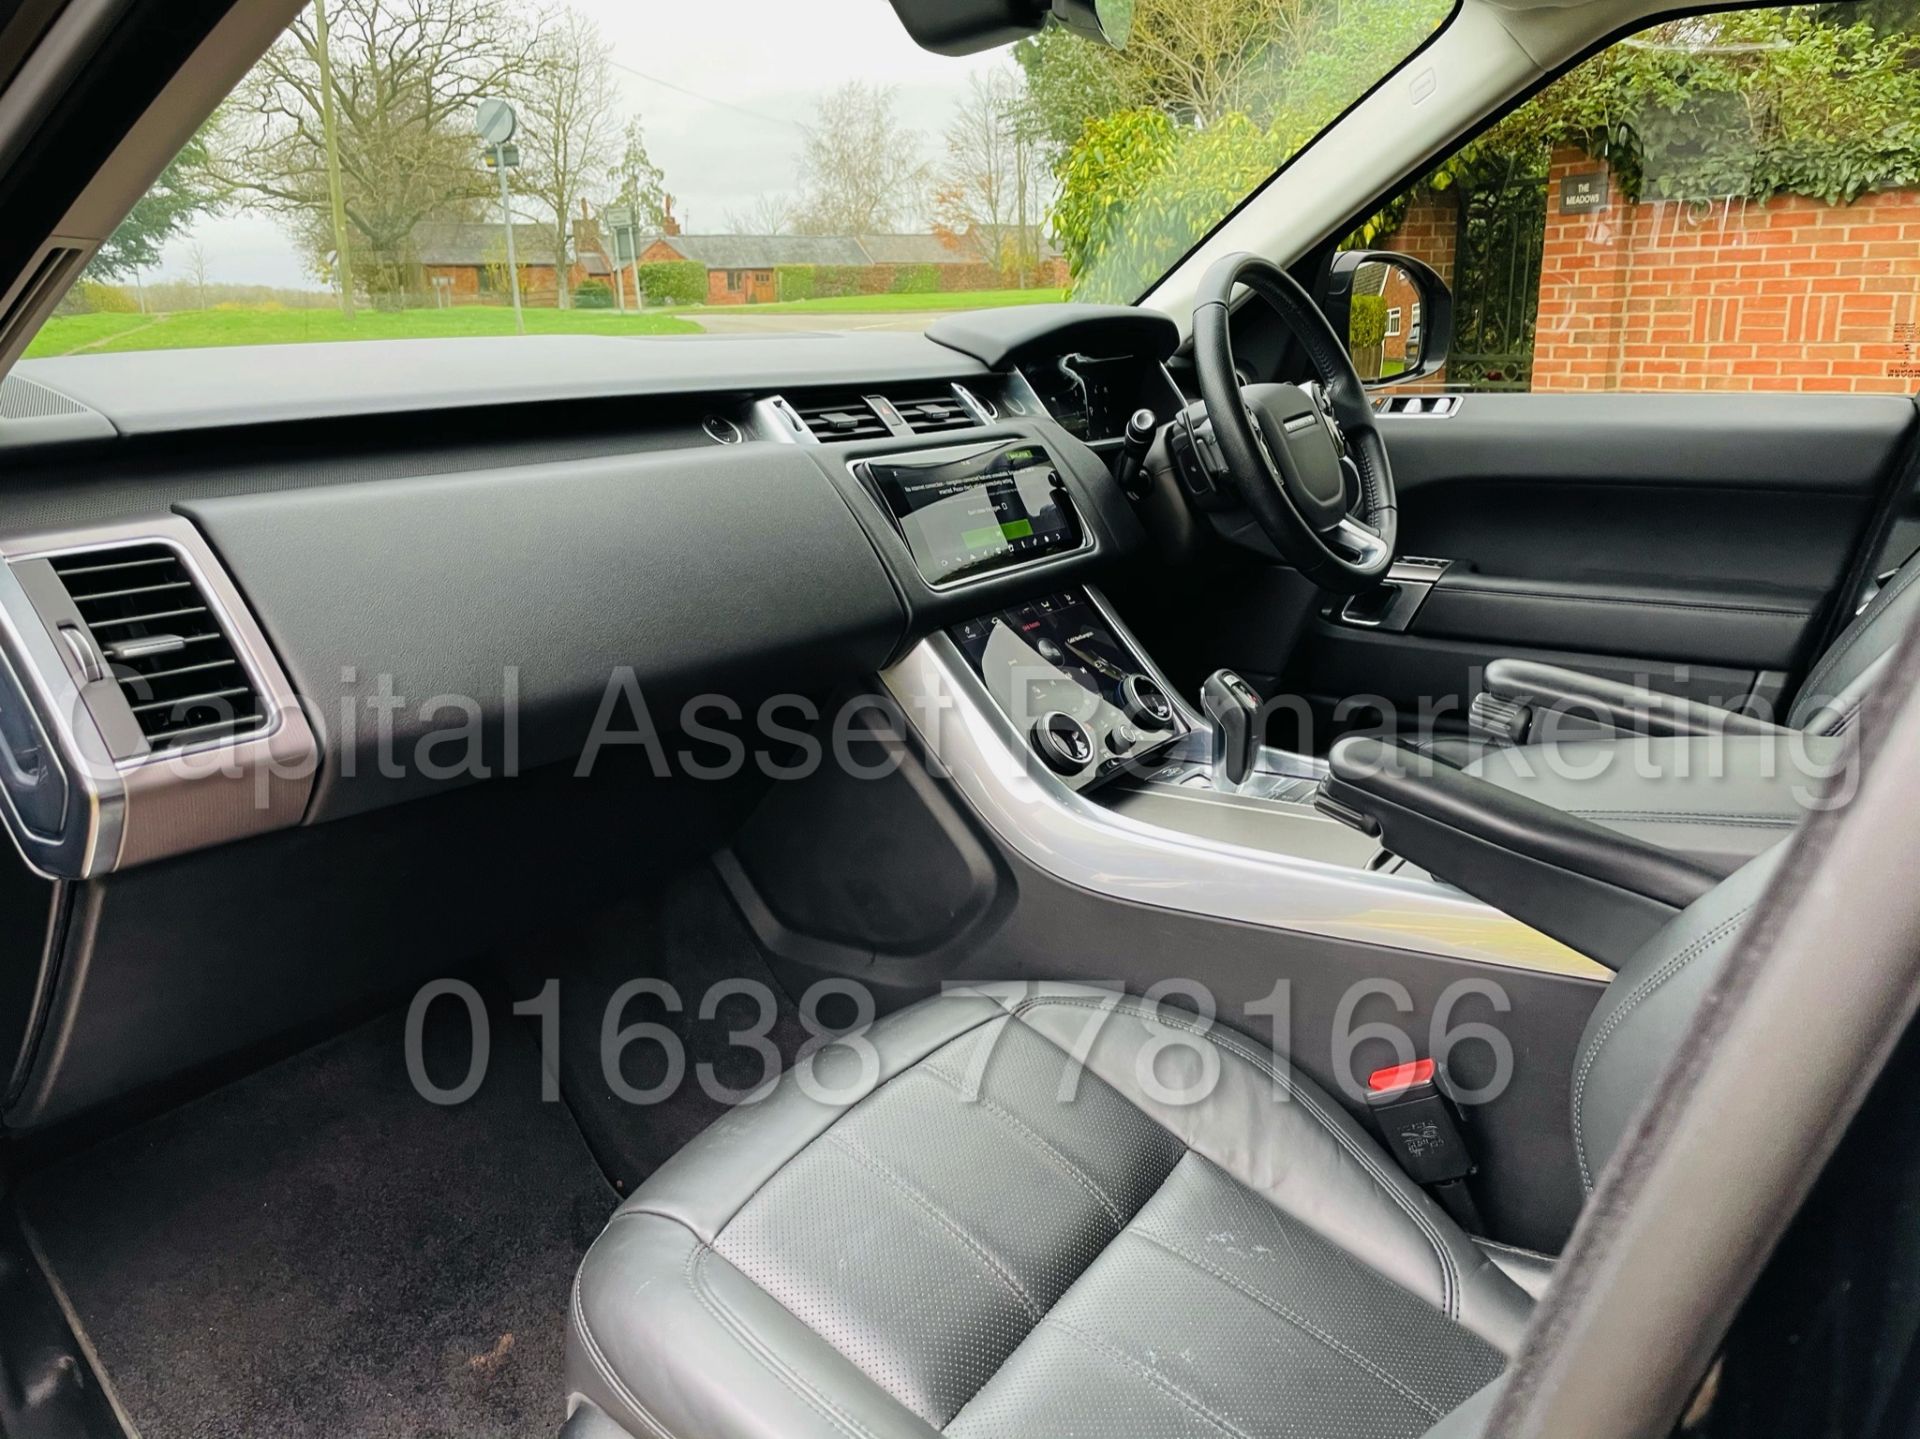 RANGE ROVER SPORT *HSE EDITION* SUV (2019 MODEL) '3.0 SDV6 - 306 BHP - 8 SPEED AUTO' *FULLY LOADED* - Image 22 of 56